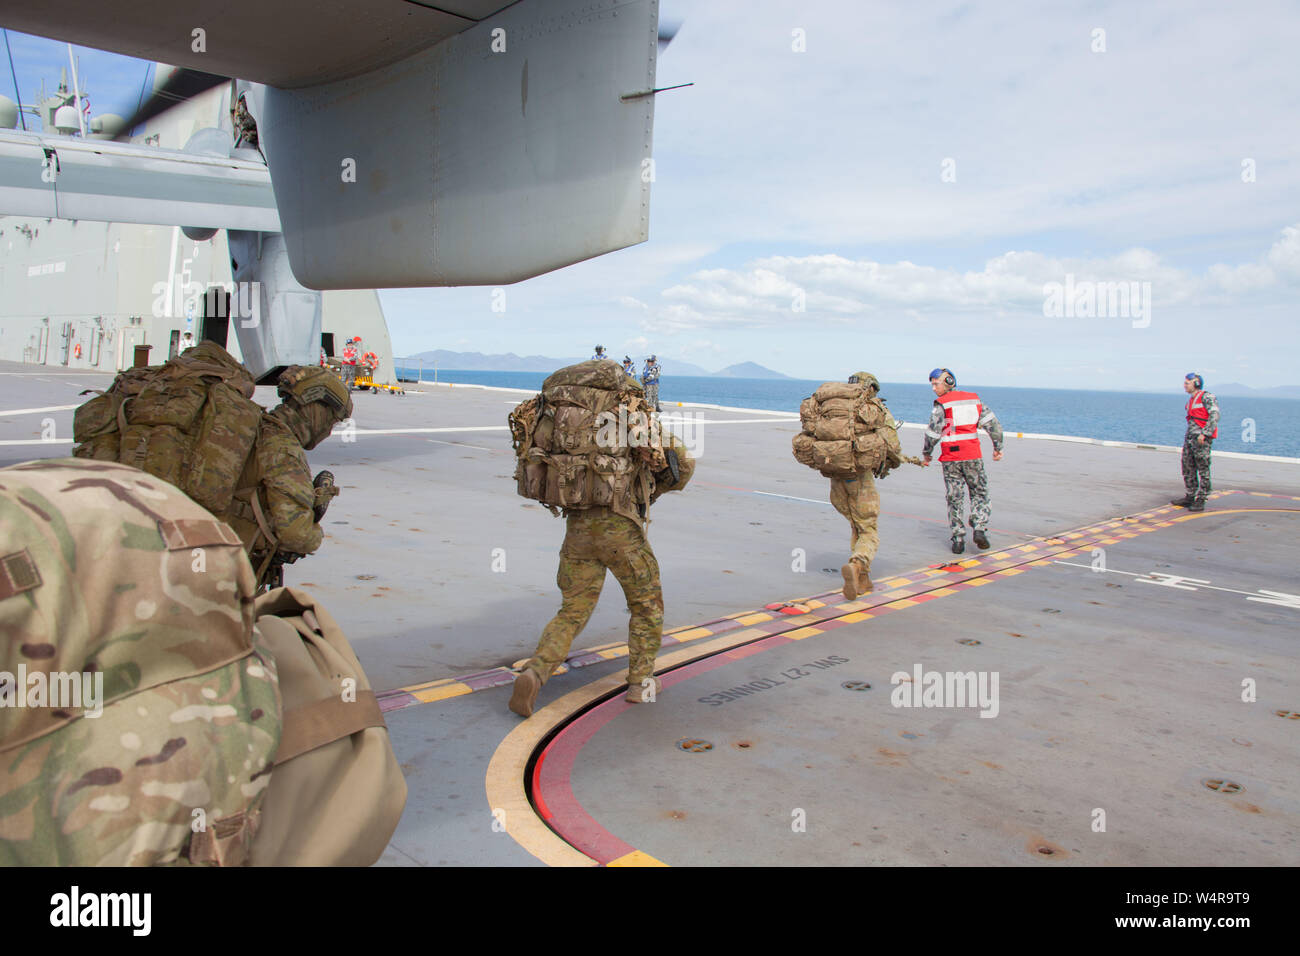 Australian Soldiers offload an MV-22B Osprey tiltrotor aircraft with Marine Medium Tiltrotor Squadron 265 (Reinforced), 31st Marine Expeditionary Unit, aboard the landing helicopter dock HMAS Canberra (LO 2), Coral Sea, July 23, 2019. The 31st MEU and USS Wasp (LHD 1) Amphibious Ready Group are currently participating in Exercise Talisman Sabre 2019 off the coast of Northern Australia. Talisman Sabre is designed to improve partner nation combat readiness and interoperability through realistic, relevant training, enhancing the ability and proficiency to respond to crisis as part of a combined e Stock Photo